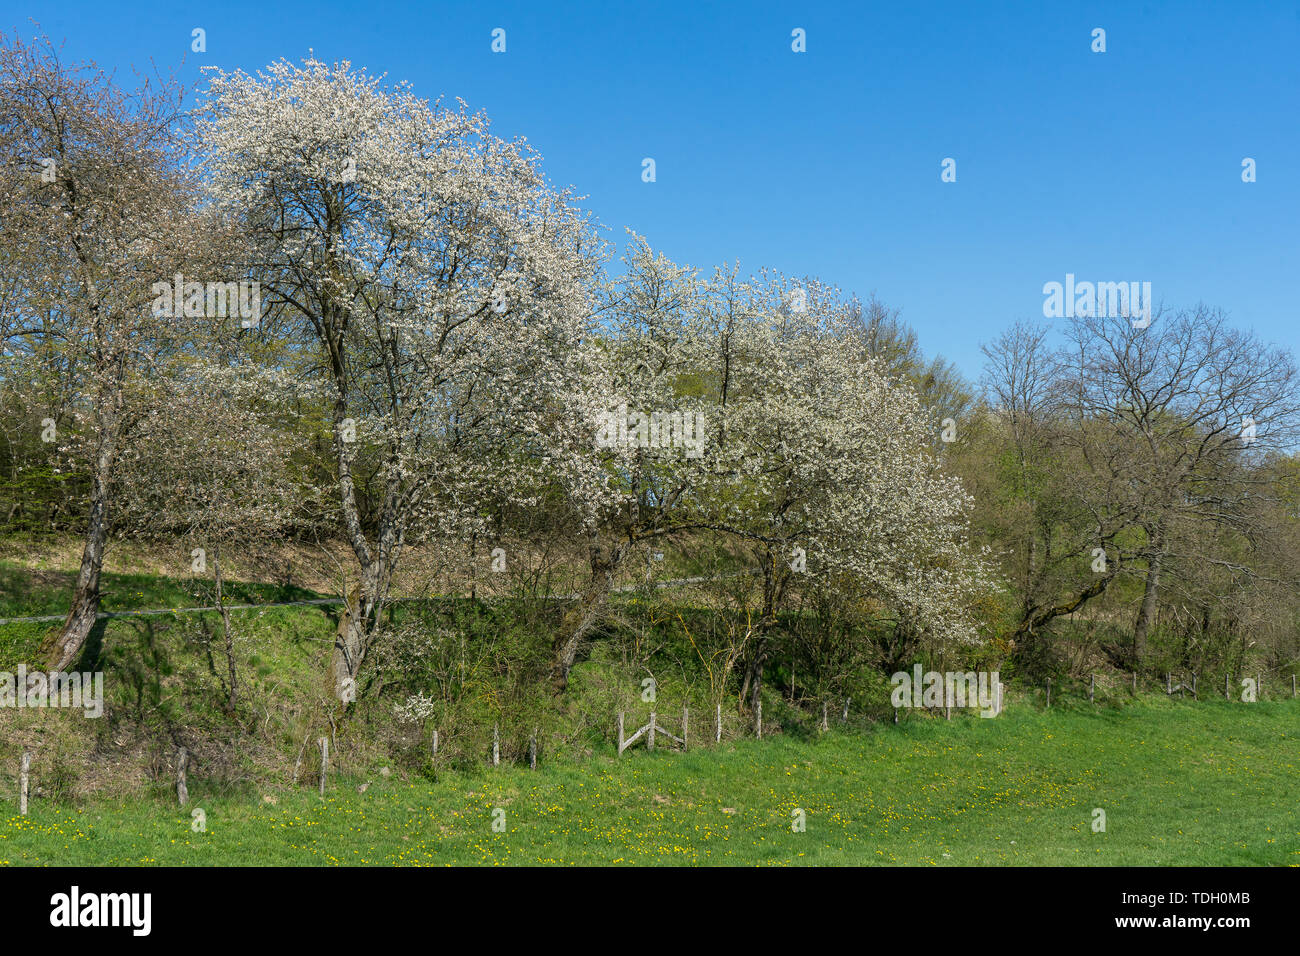 Landscape of the nature sanctuary of the german city called Hallenberg Stock Photo